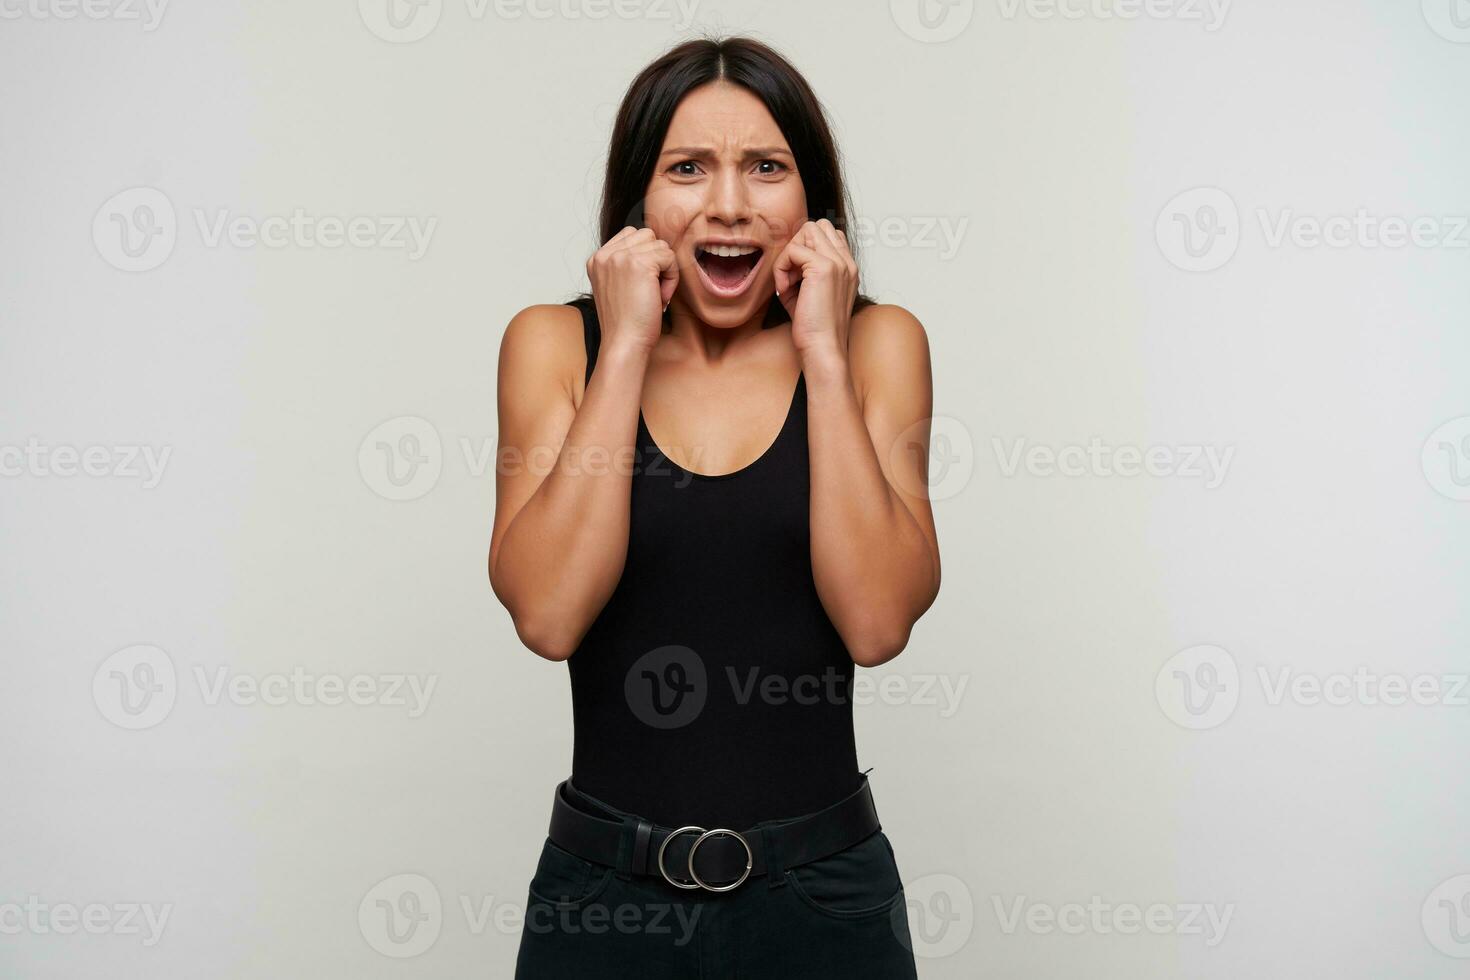 Frightened young dark haired woman with casual makeup raising hands to her face while looking scaredly at camera, frowning face with wide mouth opened while posing over white background photo